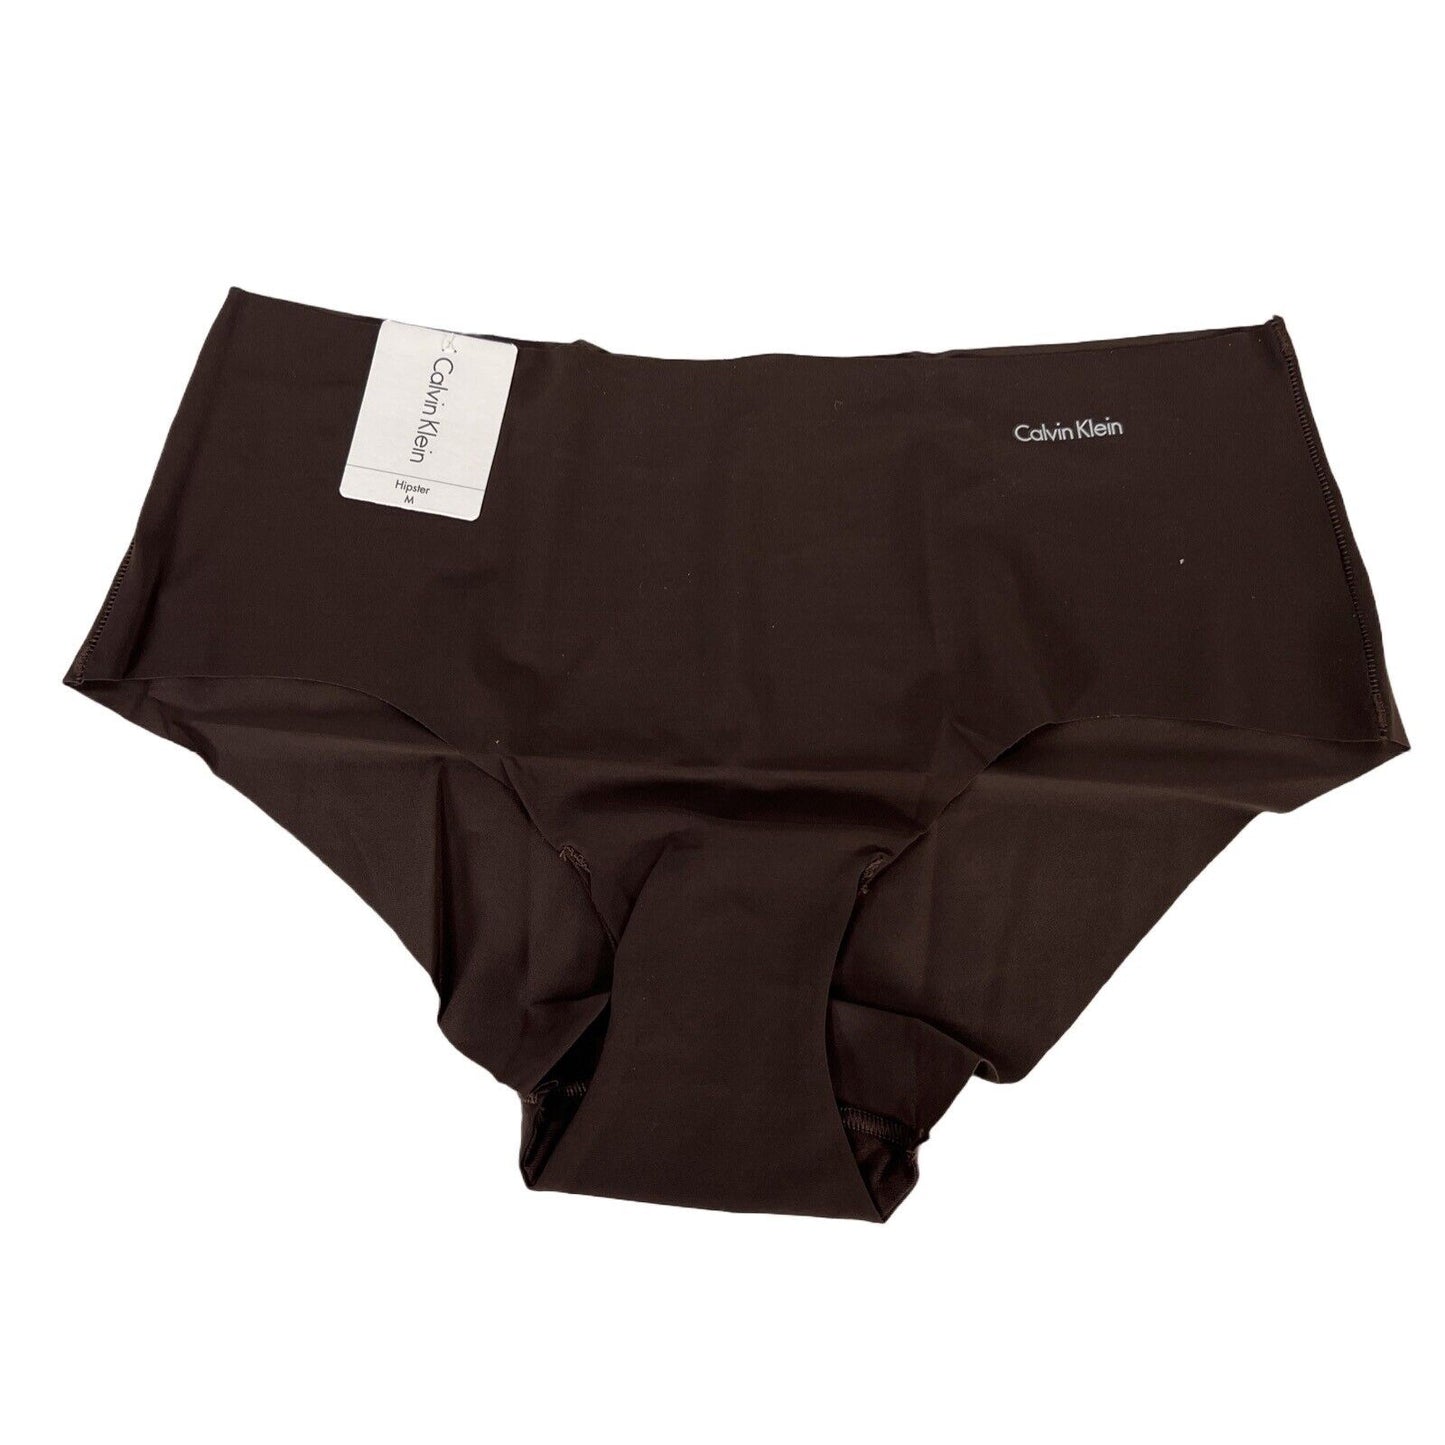 NEW Calvin Klein Women's Brown Invisible Hipster Underwear Lot of 3 - M